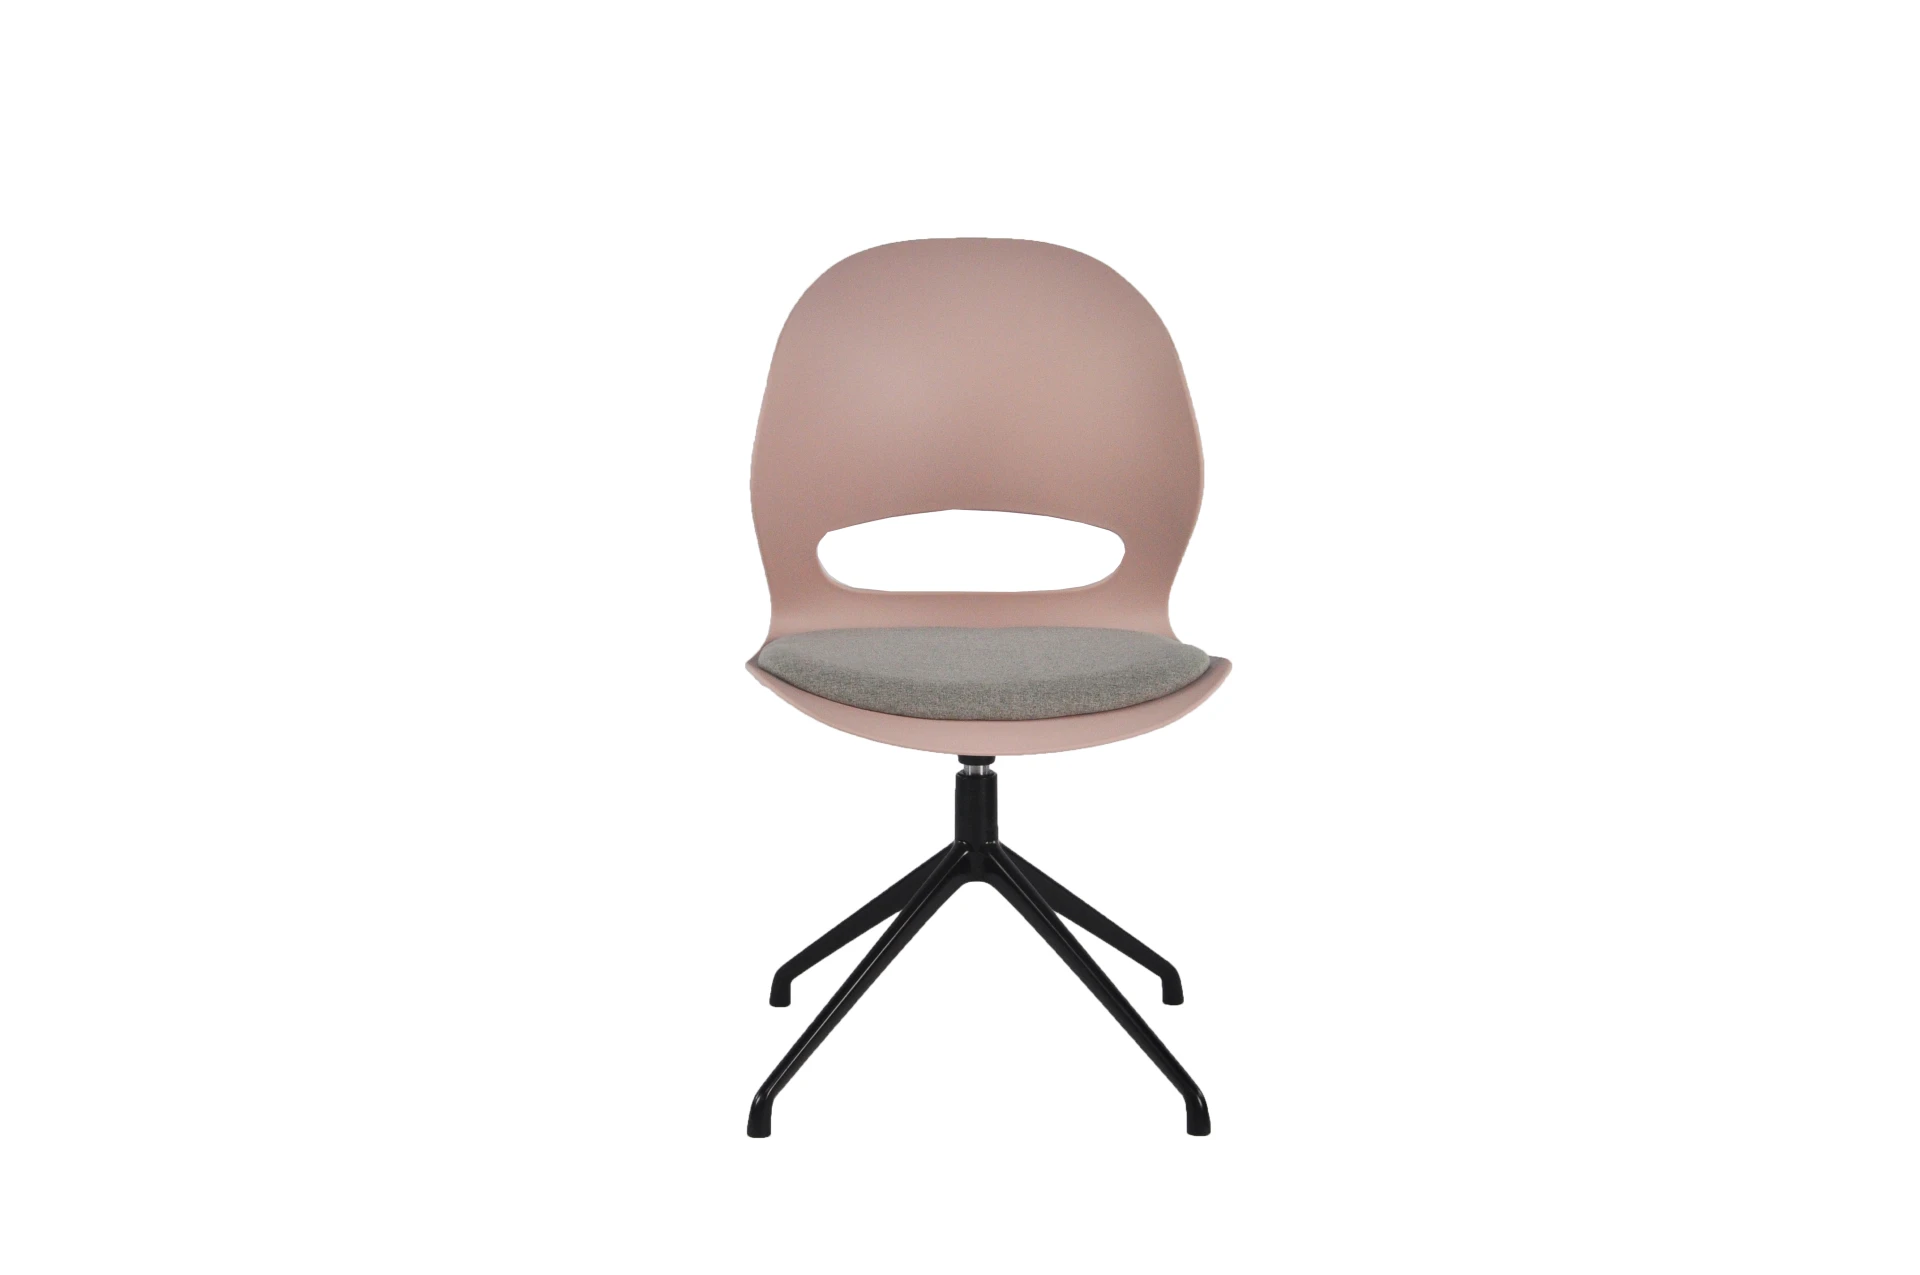 Navodesk VIS chair without wheels